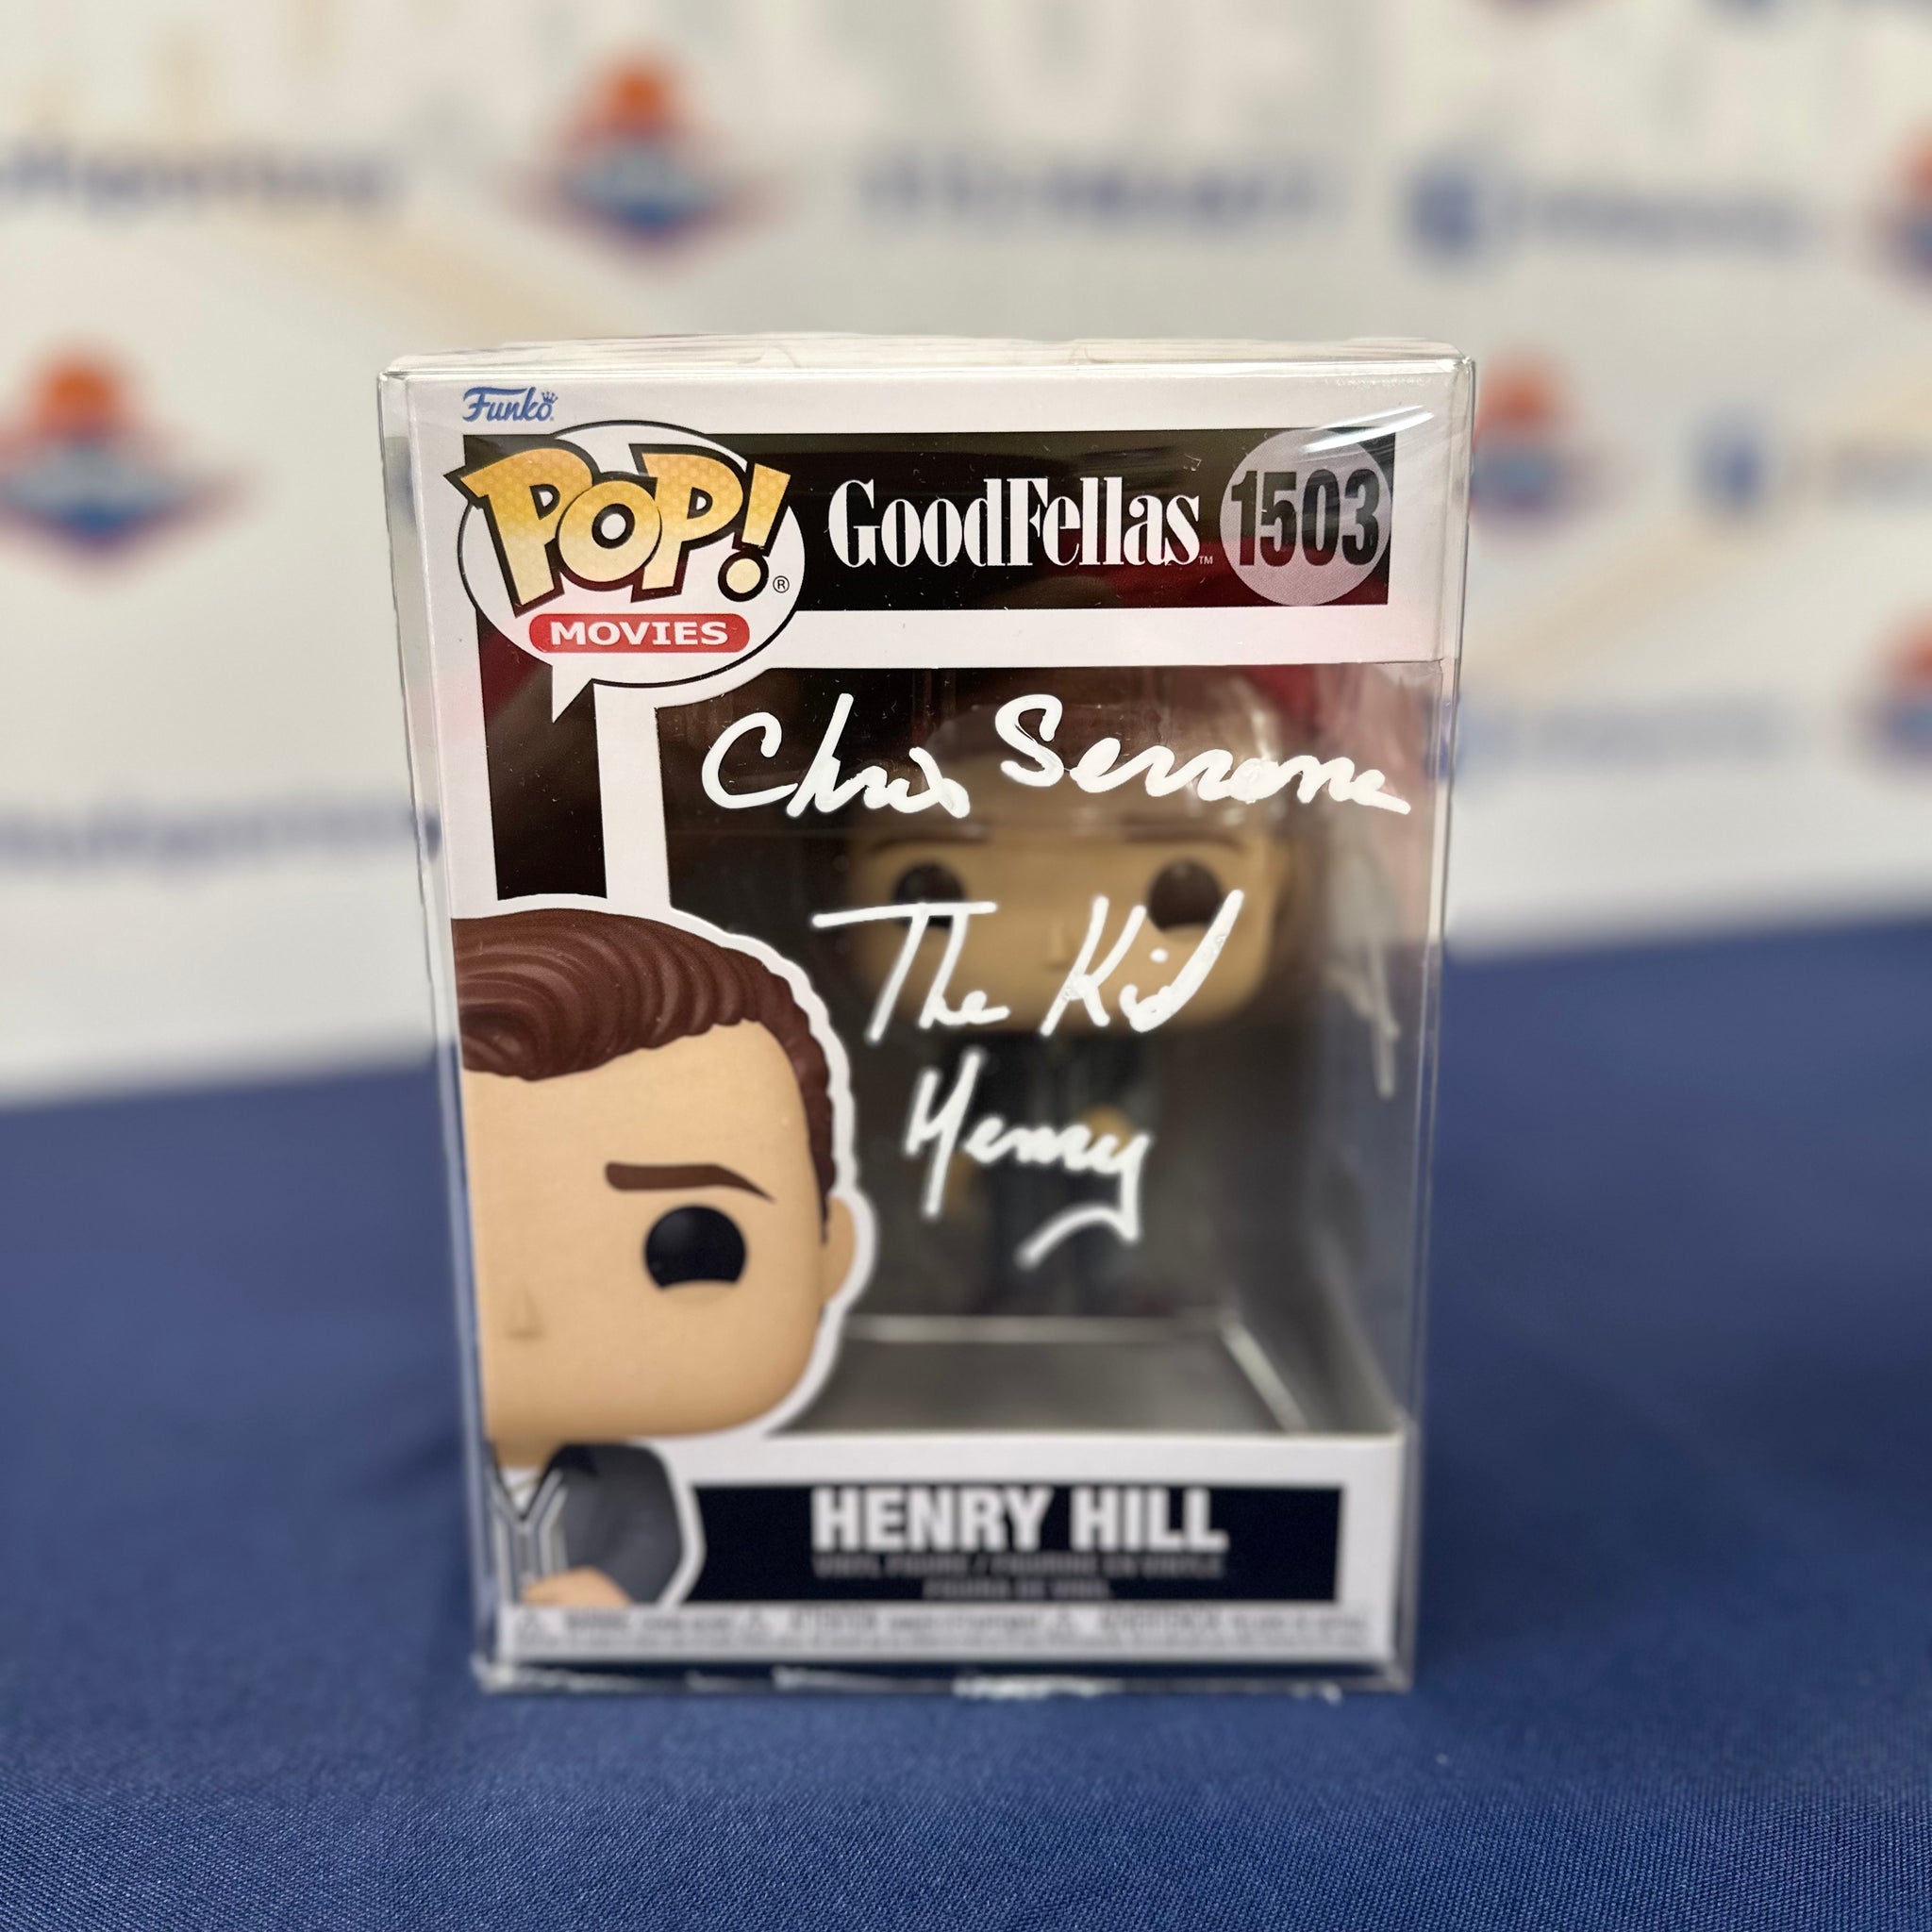 CHRIS SERRONE "HENRY HILL" GOODFELLAS SIGNED FUNKO POP! INSCR. THE KID HENRY / YOU LOOK LIKE A GANGSTER! BAS AUTHENTIC!